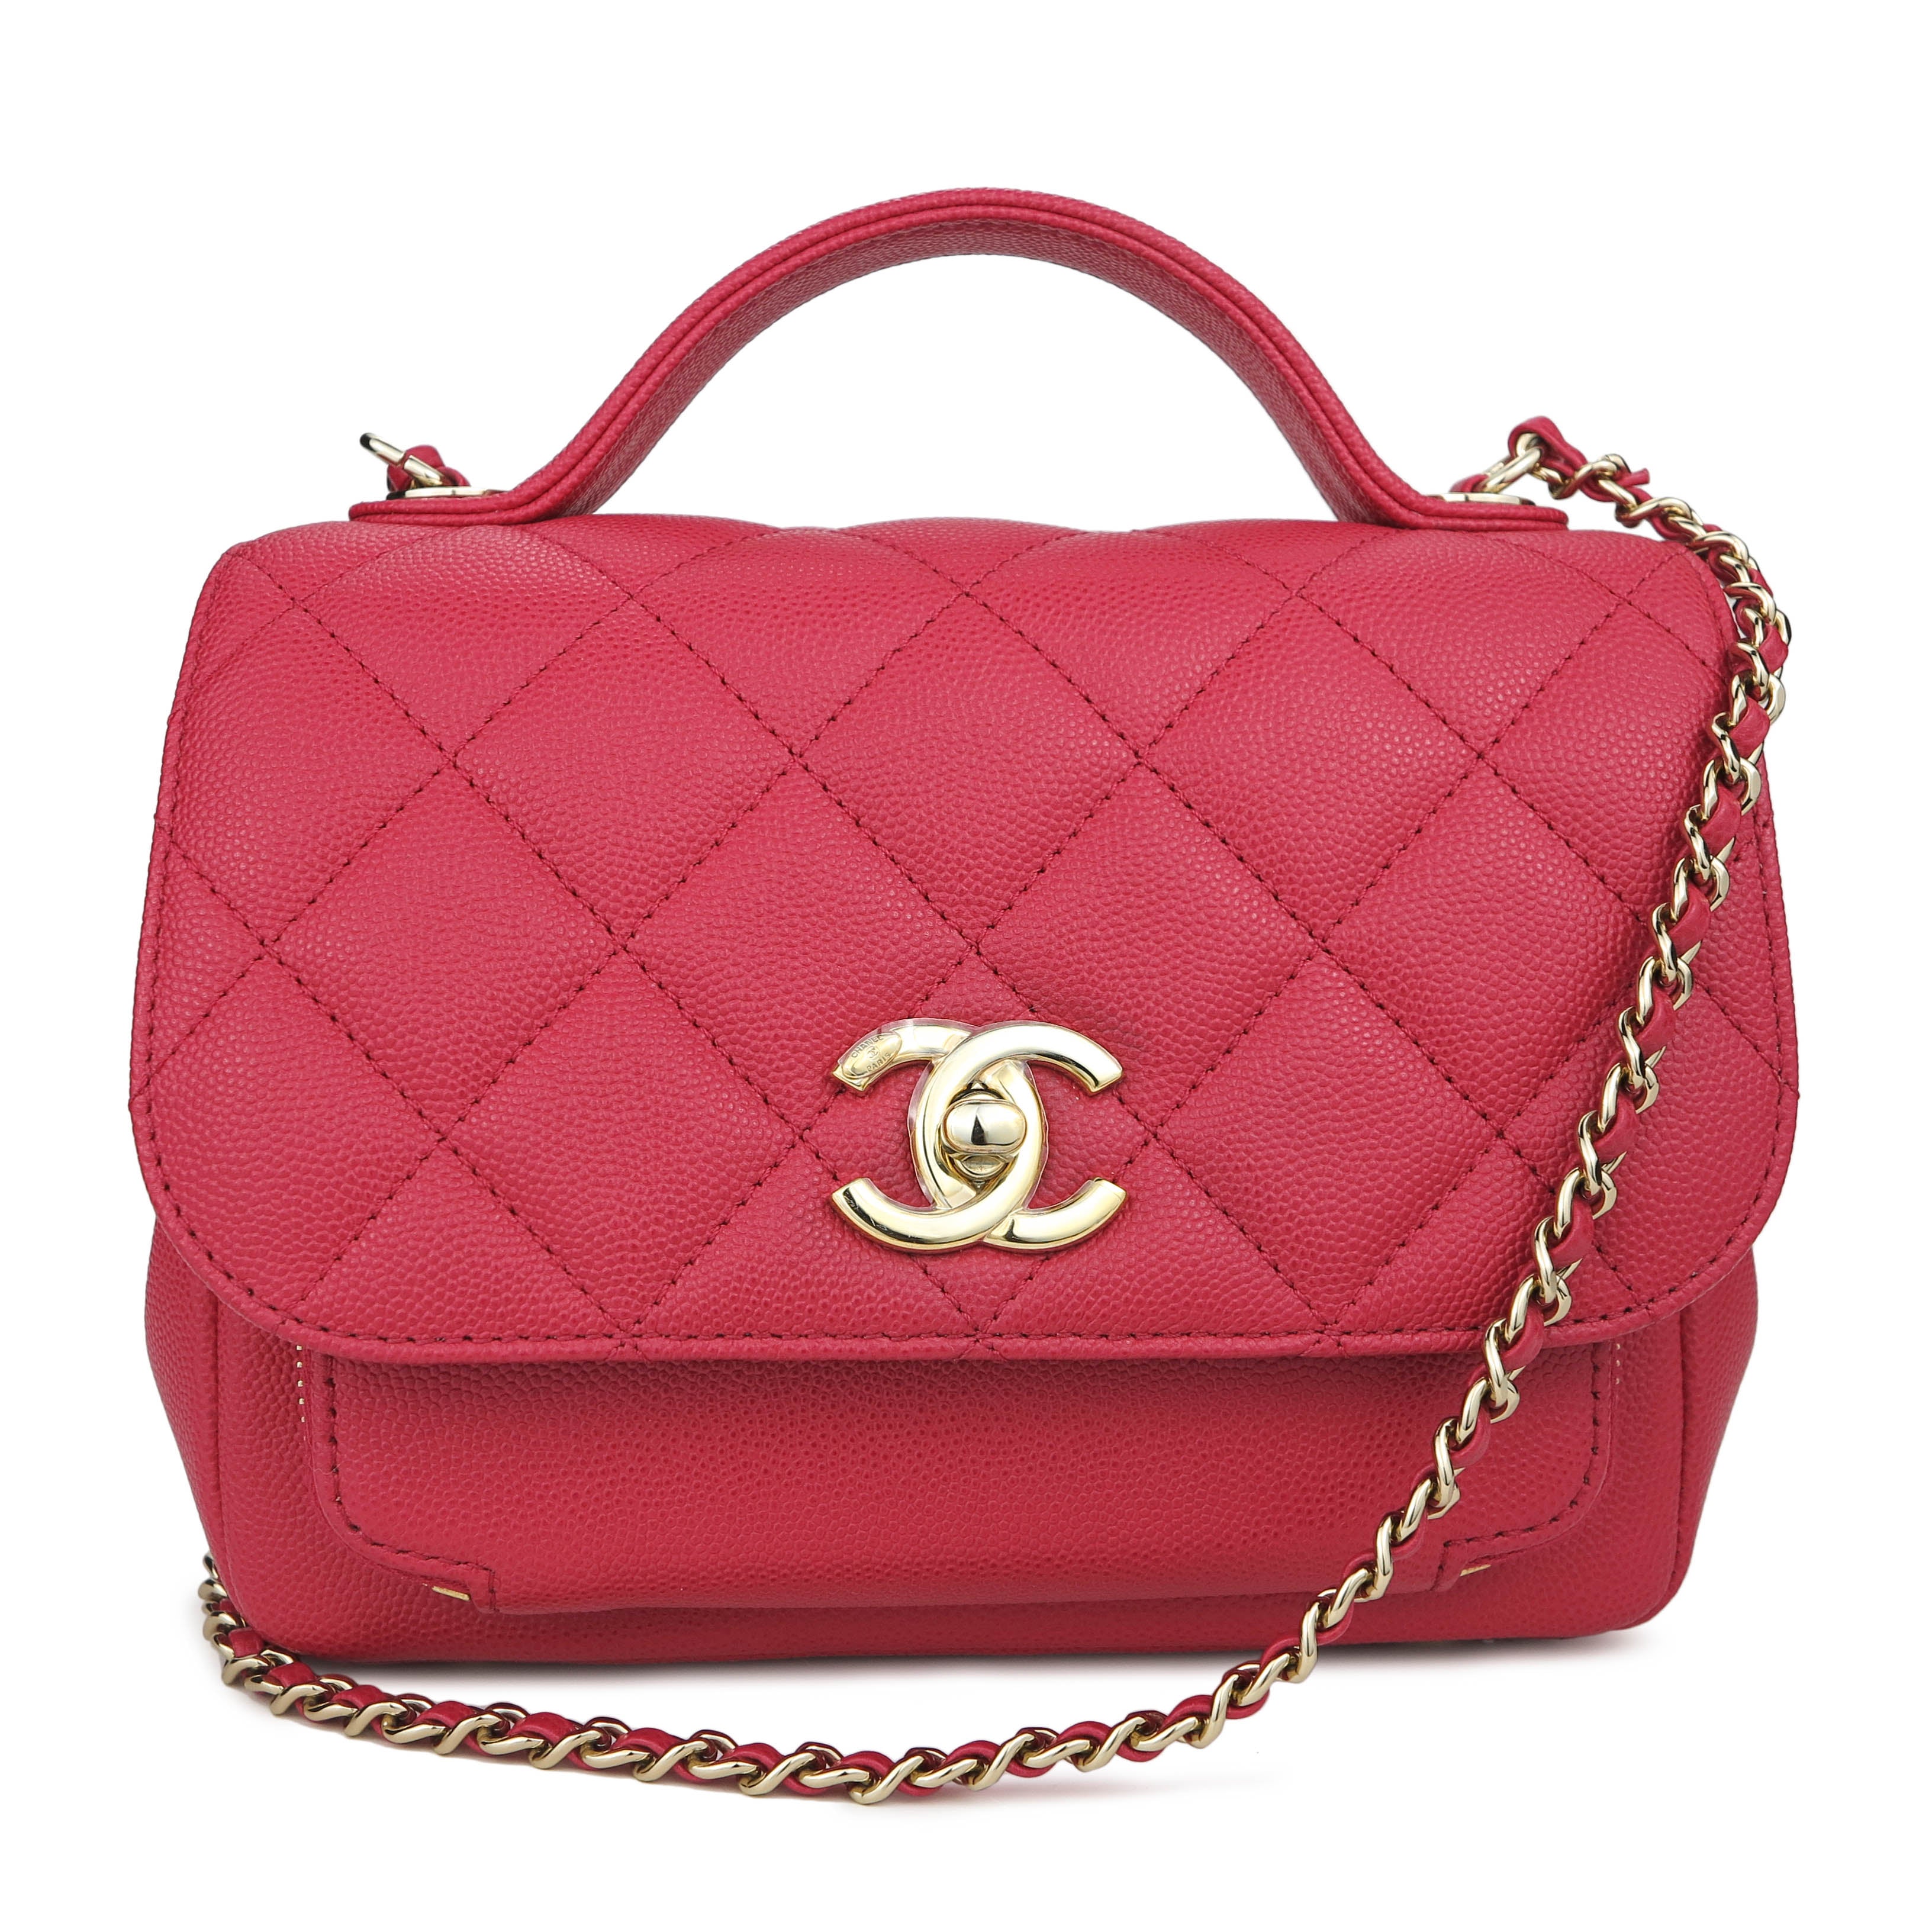 Chanel Small Business Affinity Shopping Bag - Pink Handle Bags